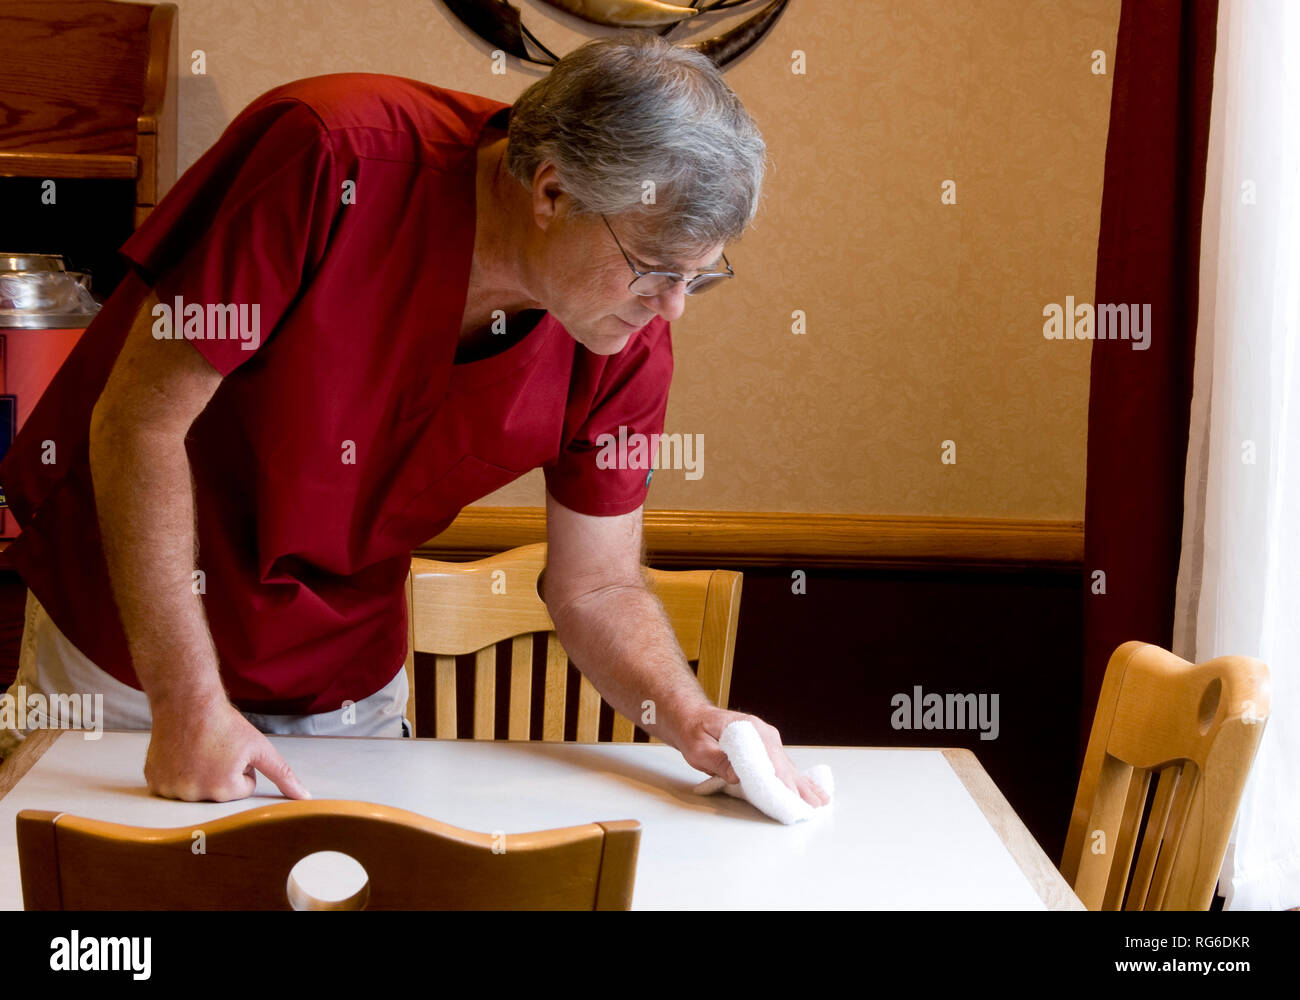 Worker cleaning a table in a restaurant setting Stock Photo